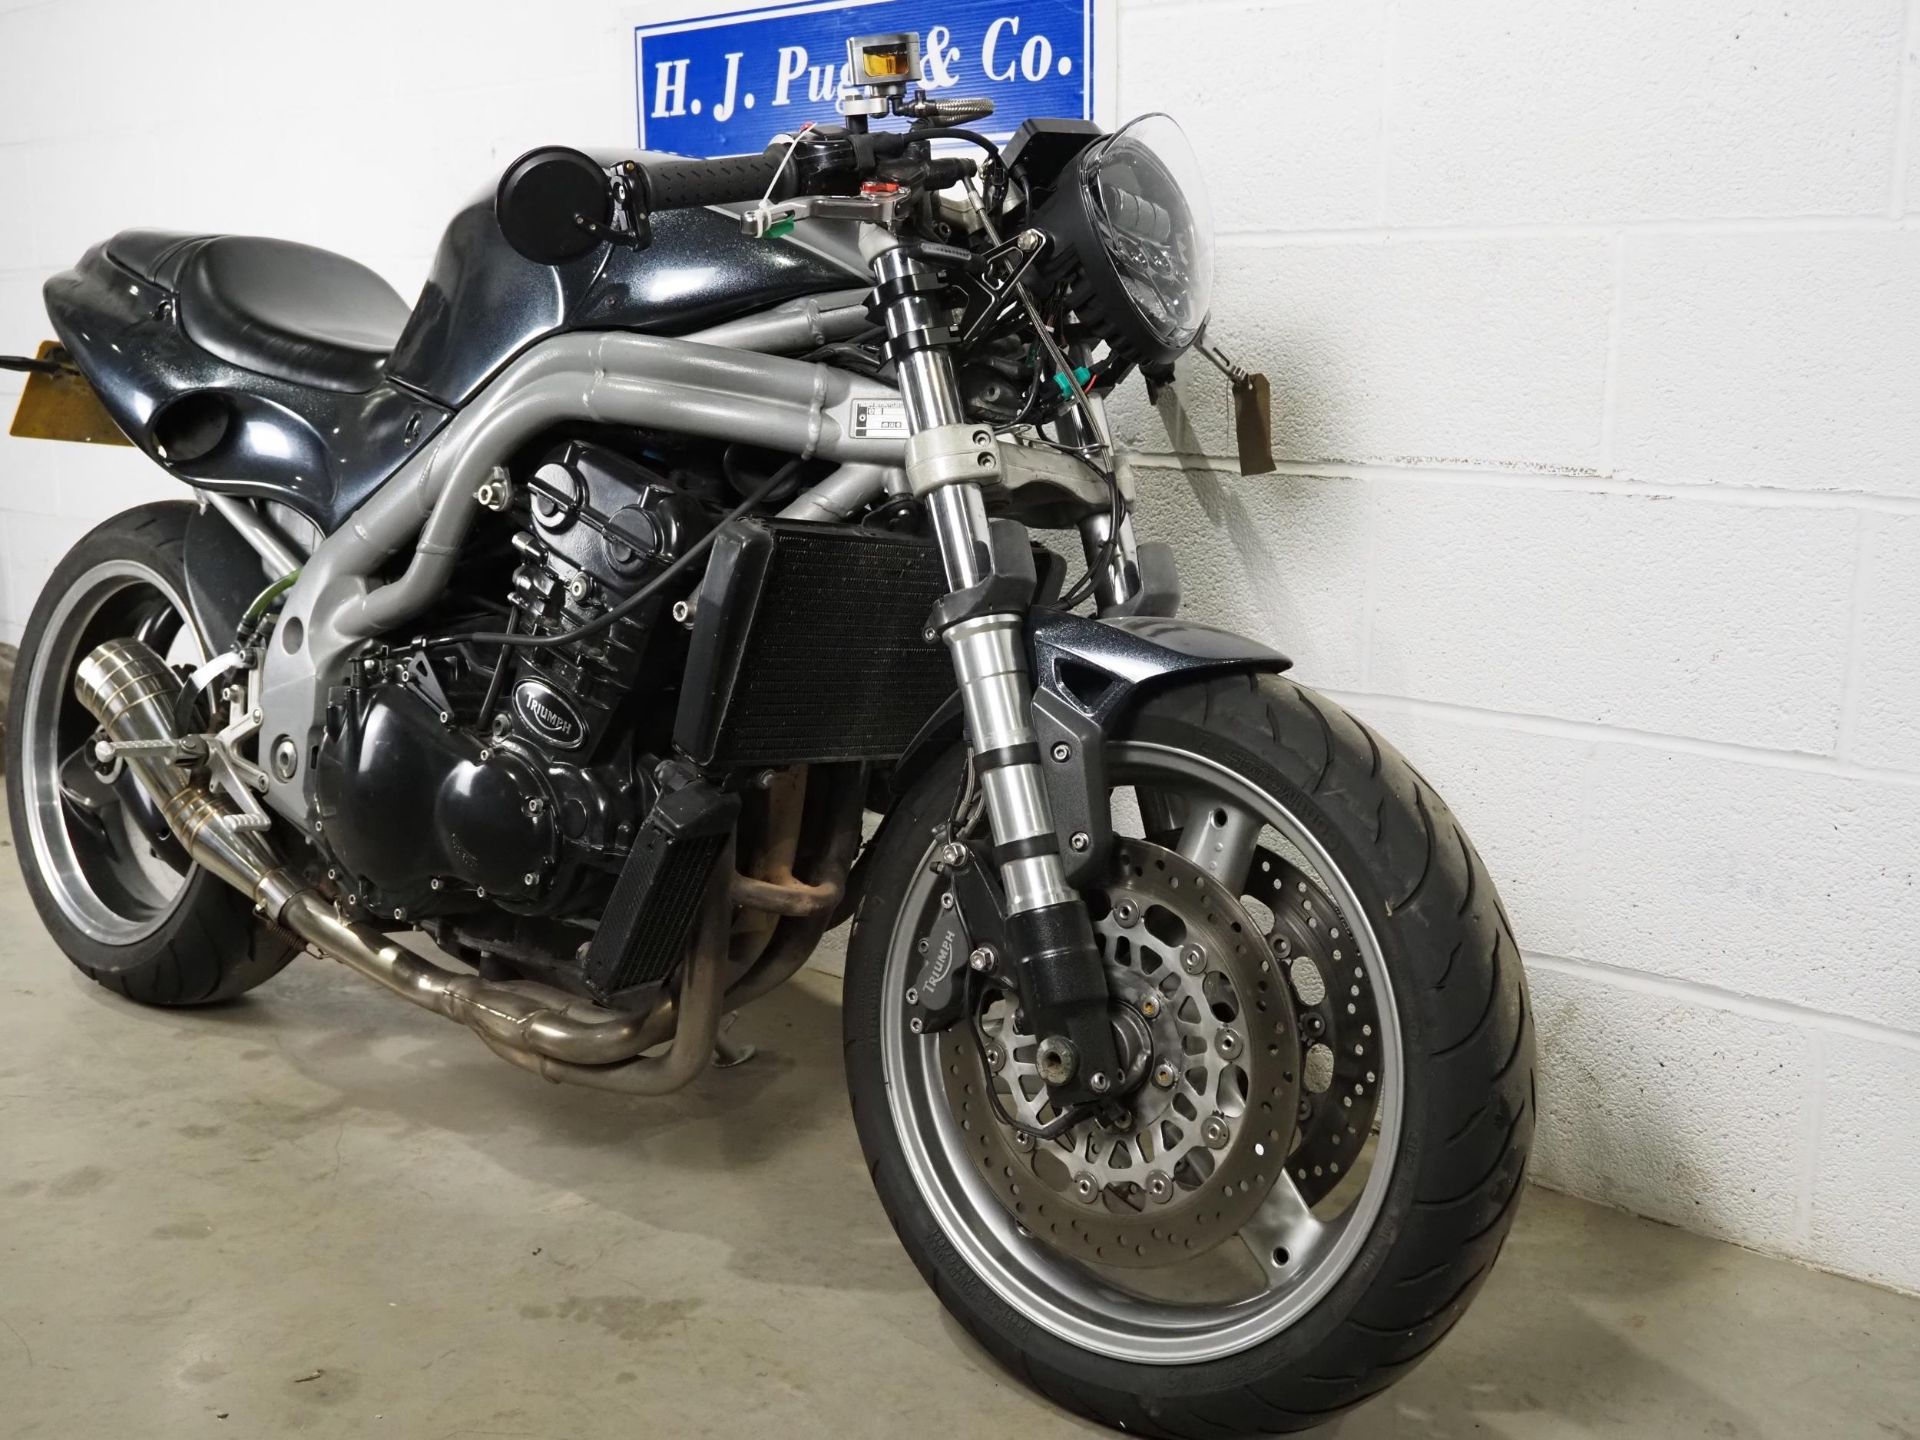 Triumph 955I Speed Triple motorcycle. 2001. 955cc. Runs and rides, digital dash, custom SS exhaust - Image 2 of 6